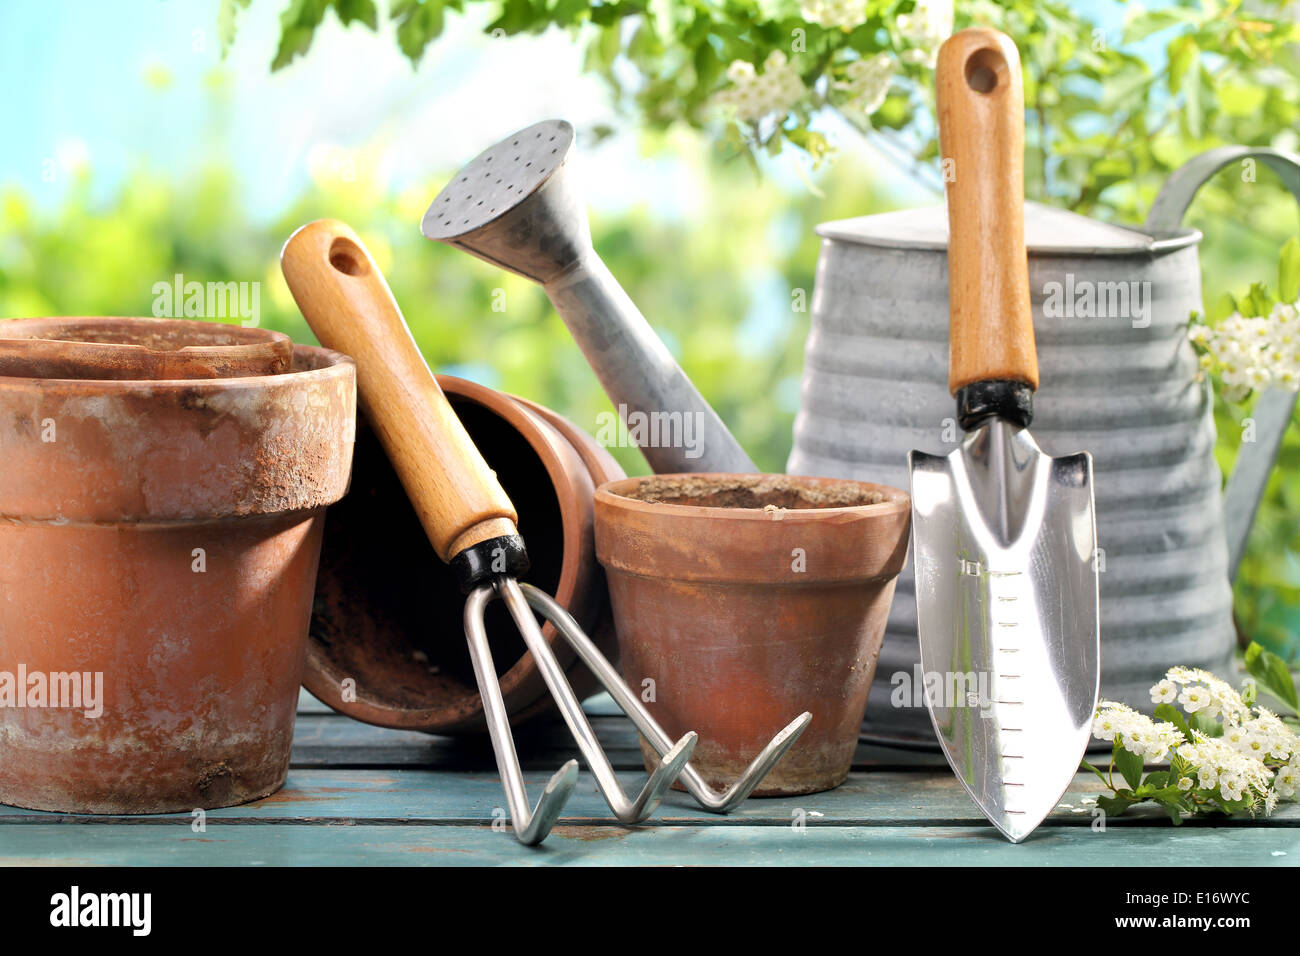 Outdoor gardening tools on table Stock Photo